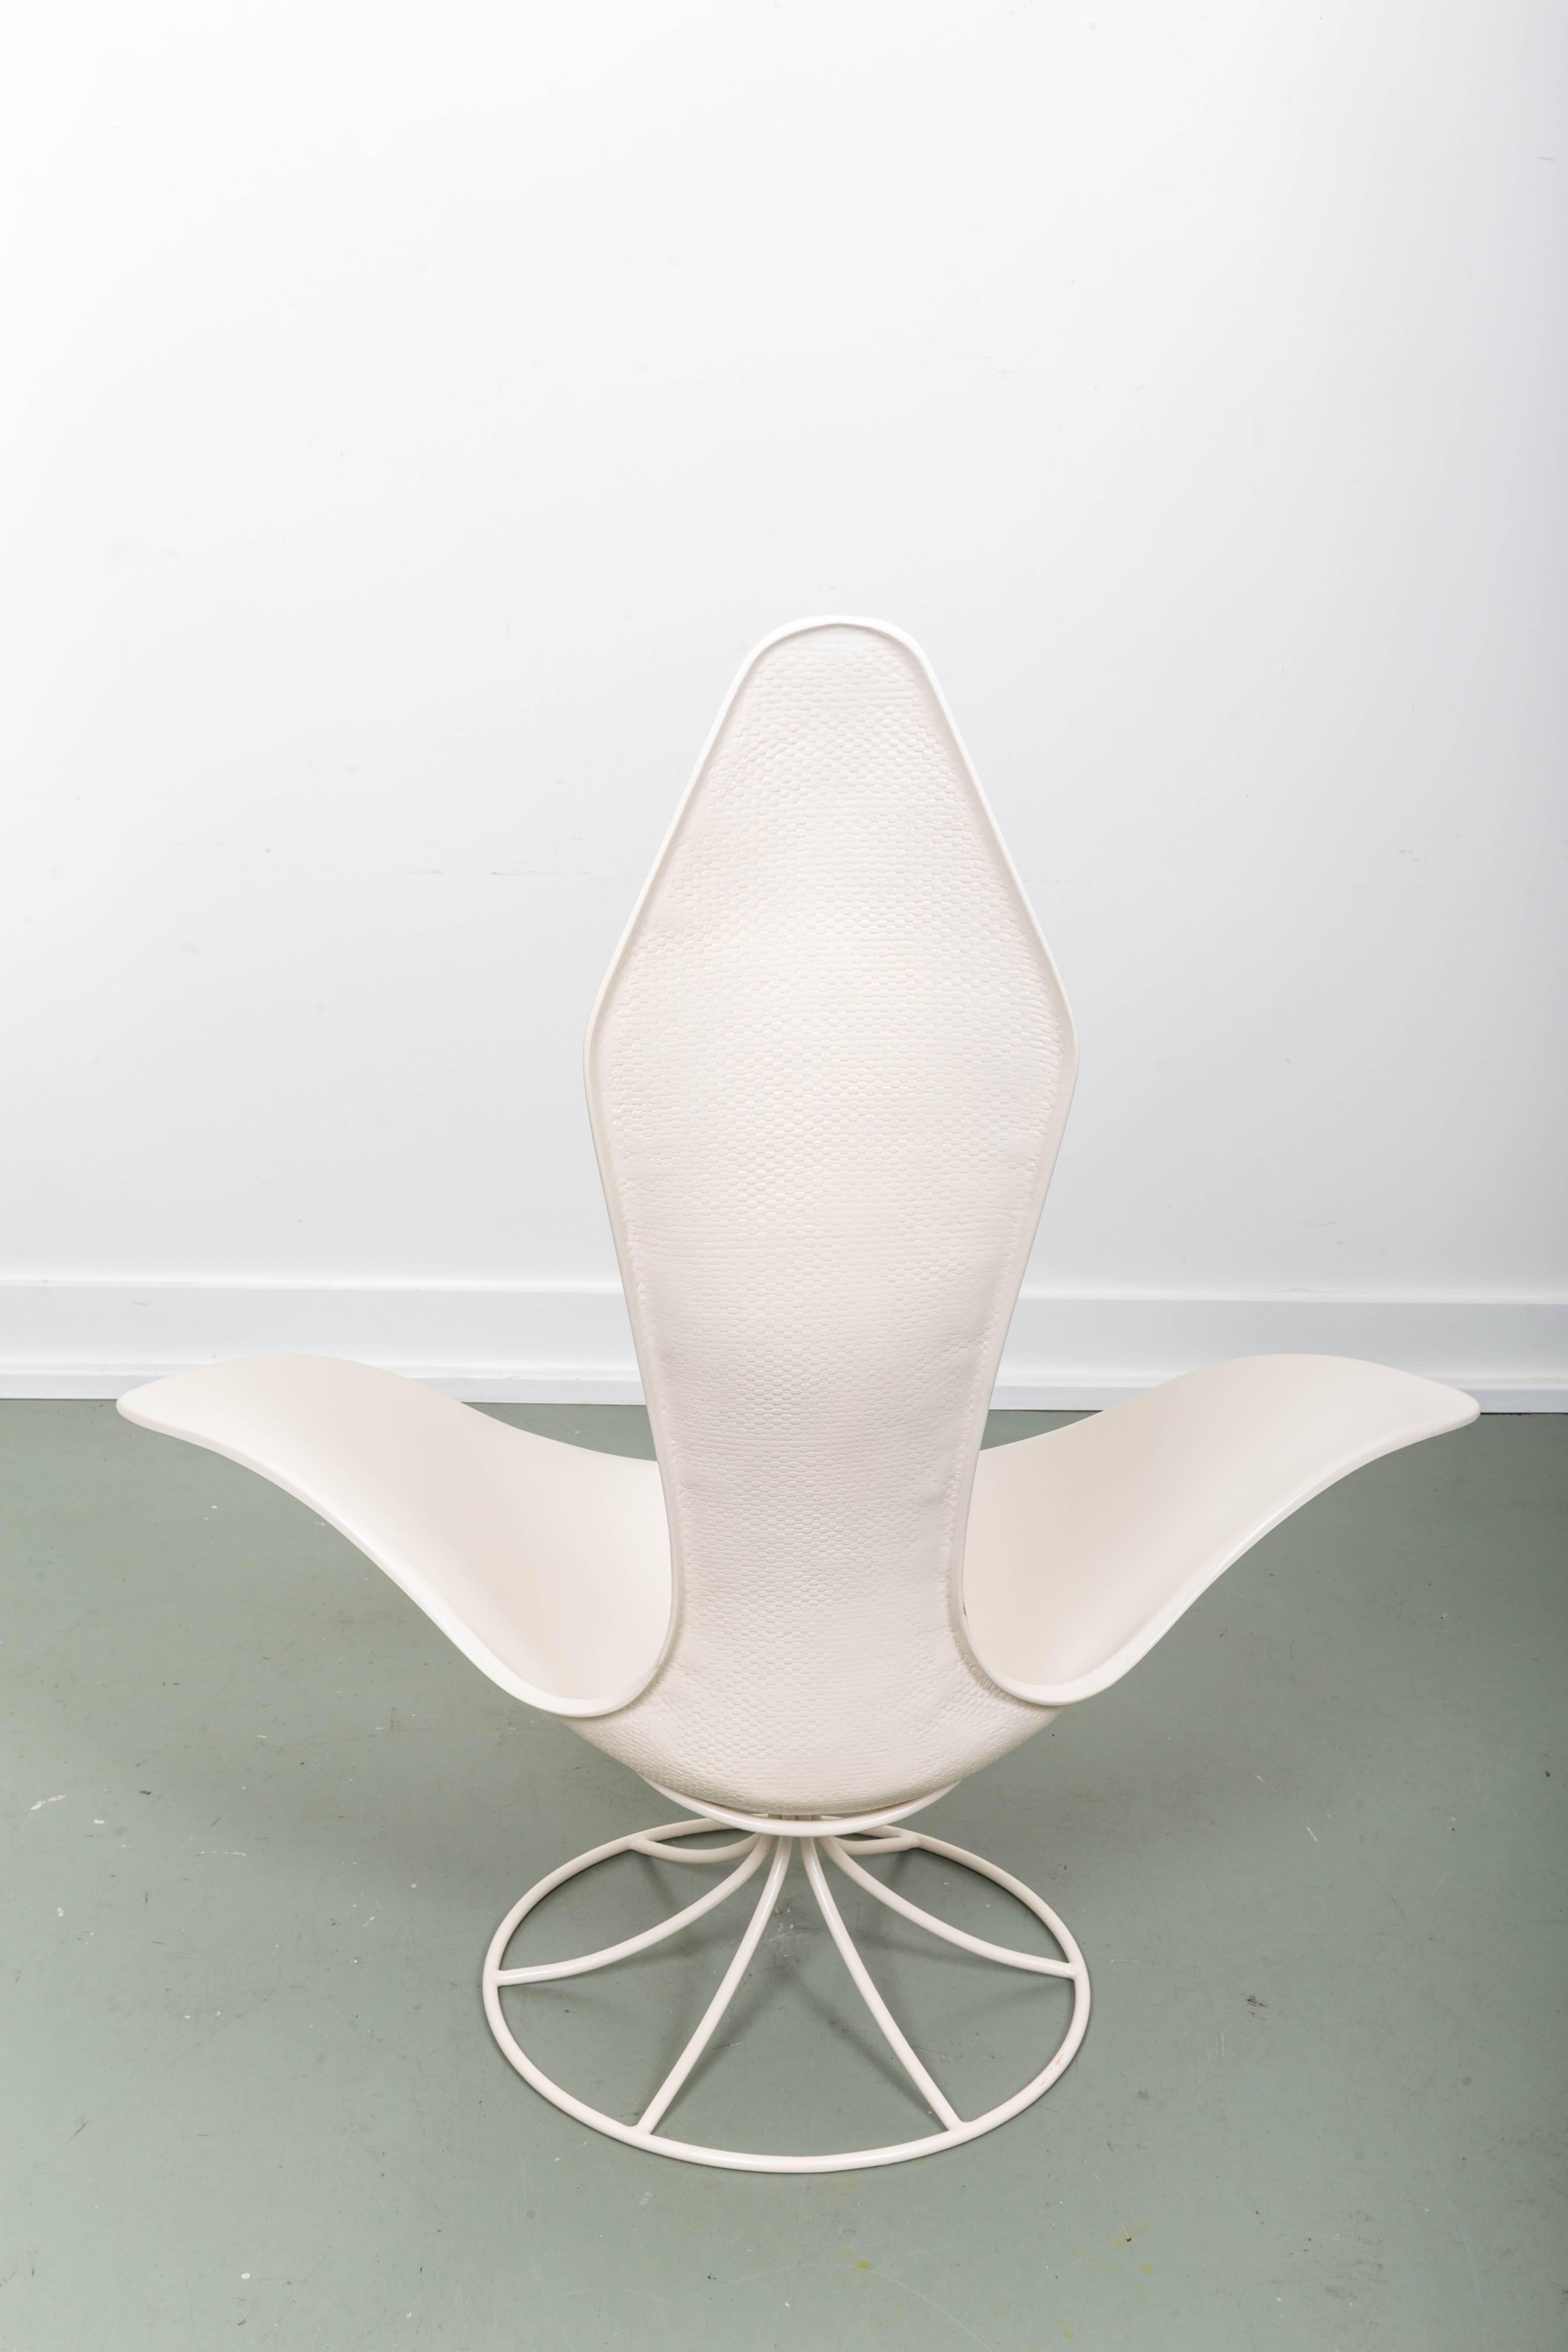 American Tulip Chair by Erwin and Estelle Laverne